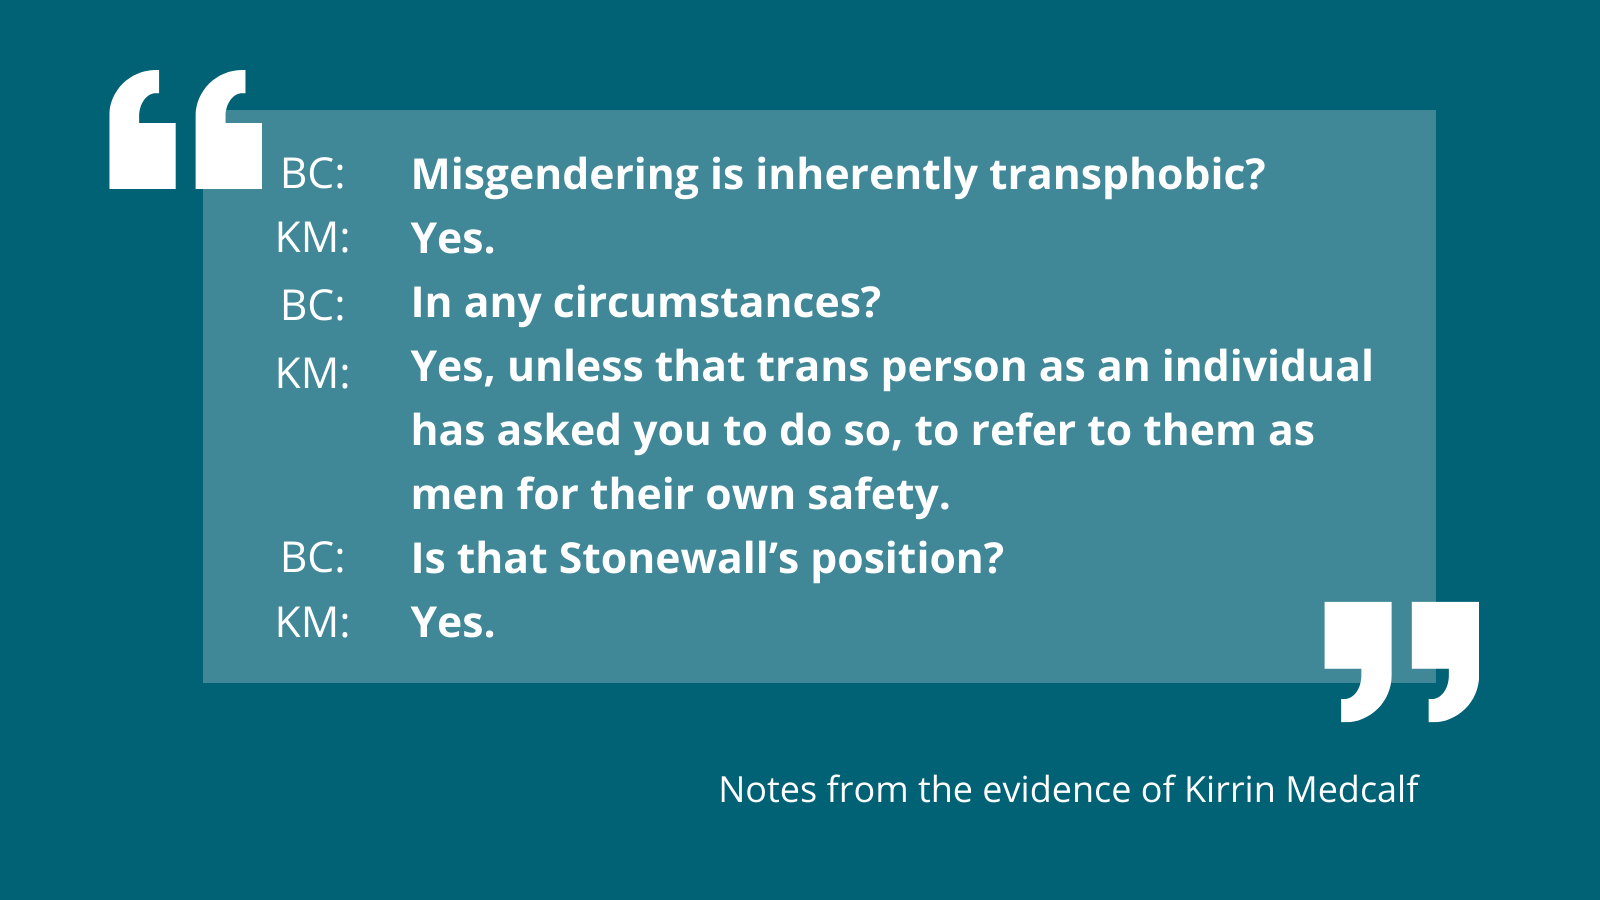 Misgendering is inherently transphobic? Yes. In any circumstances? Yes, unless that trans person as an individual has asked you to do so, to refer to them as men for their own safety. Is that Stonewall’s position? Yes.